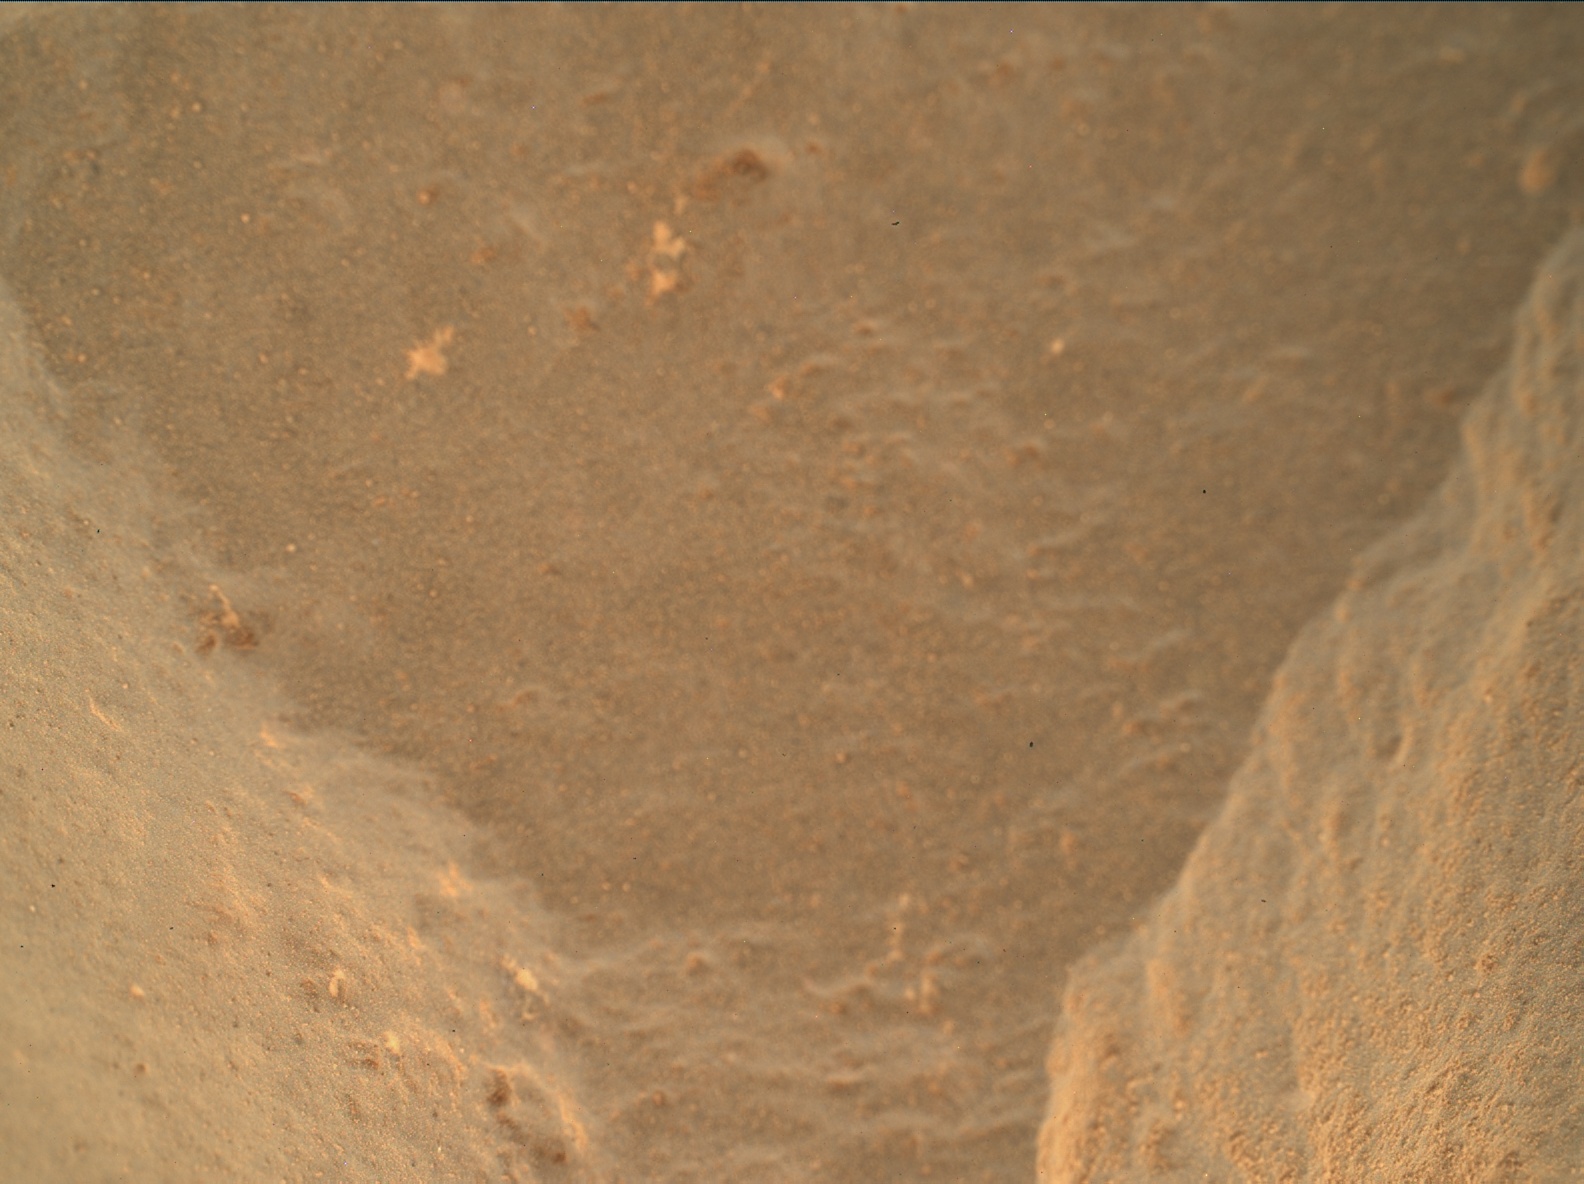 Nasa's Mars rover Curiosity acquired this image using its Mars Hand Lens Imager (MAHLI) on Sol 472